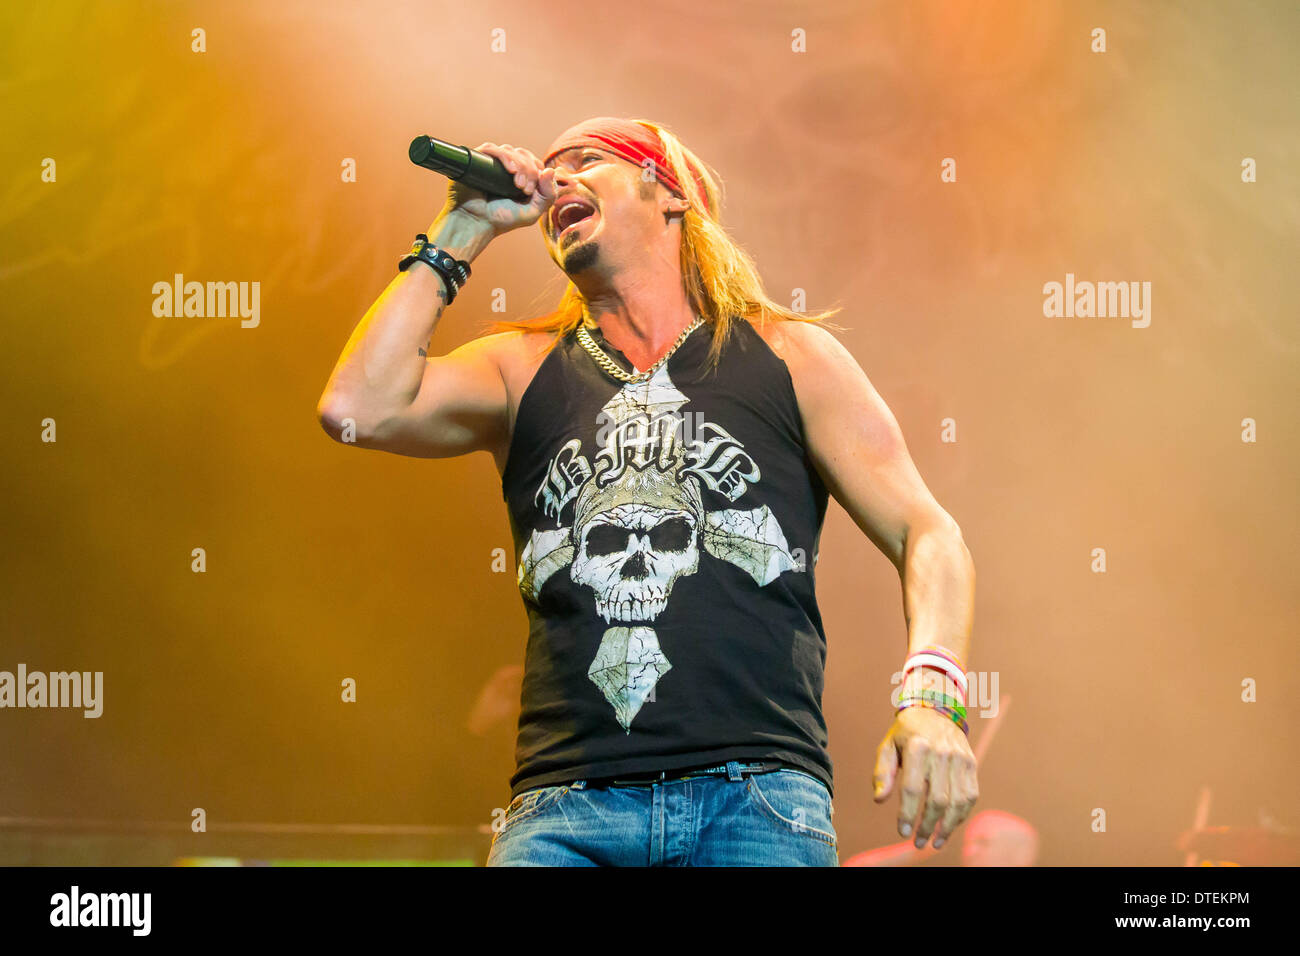 Detroit, Michigan, USA. 16th Feb, 2014. American Singer-Songwriter BRET MICHAELS of The Bret Michaels Band performing on his 'Rock For Jobs'' concert at The Motor City Casino Soundboard in Detroit MI on February 16th 2014 Credit:  Marc Nader/ZUMA Wire/ZUMAPRESS.com/Alamy Live News Stock Photo